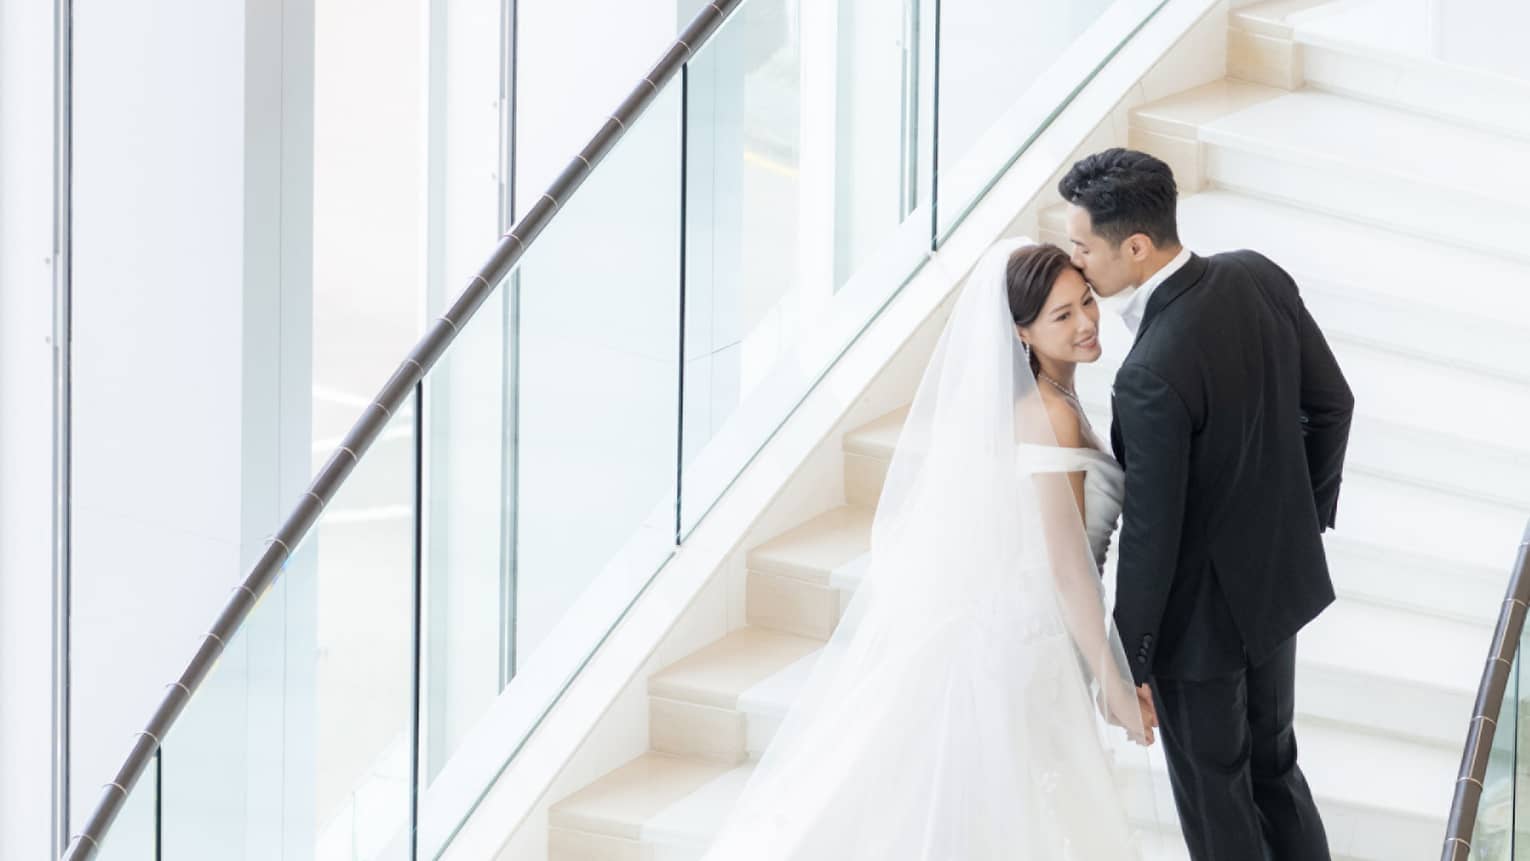 A bride and groom walking up stairs near large windows.